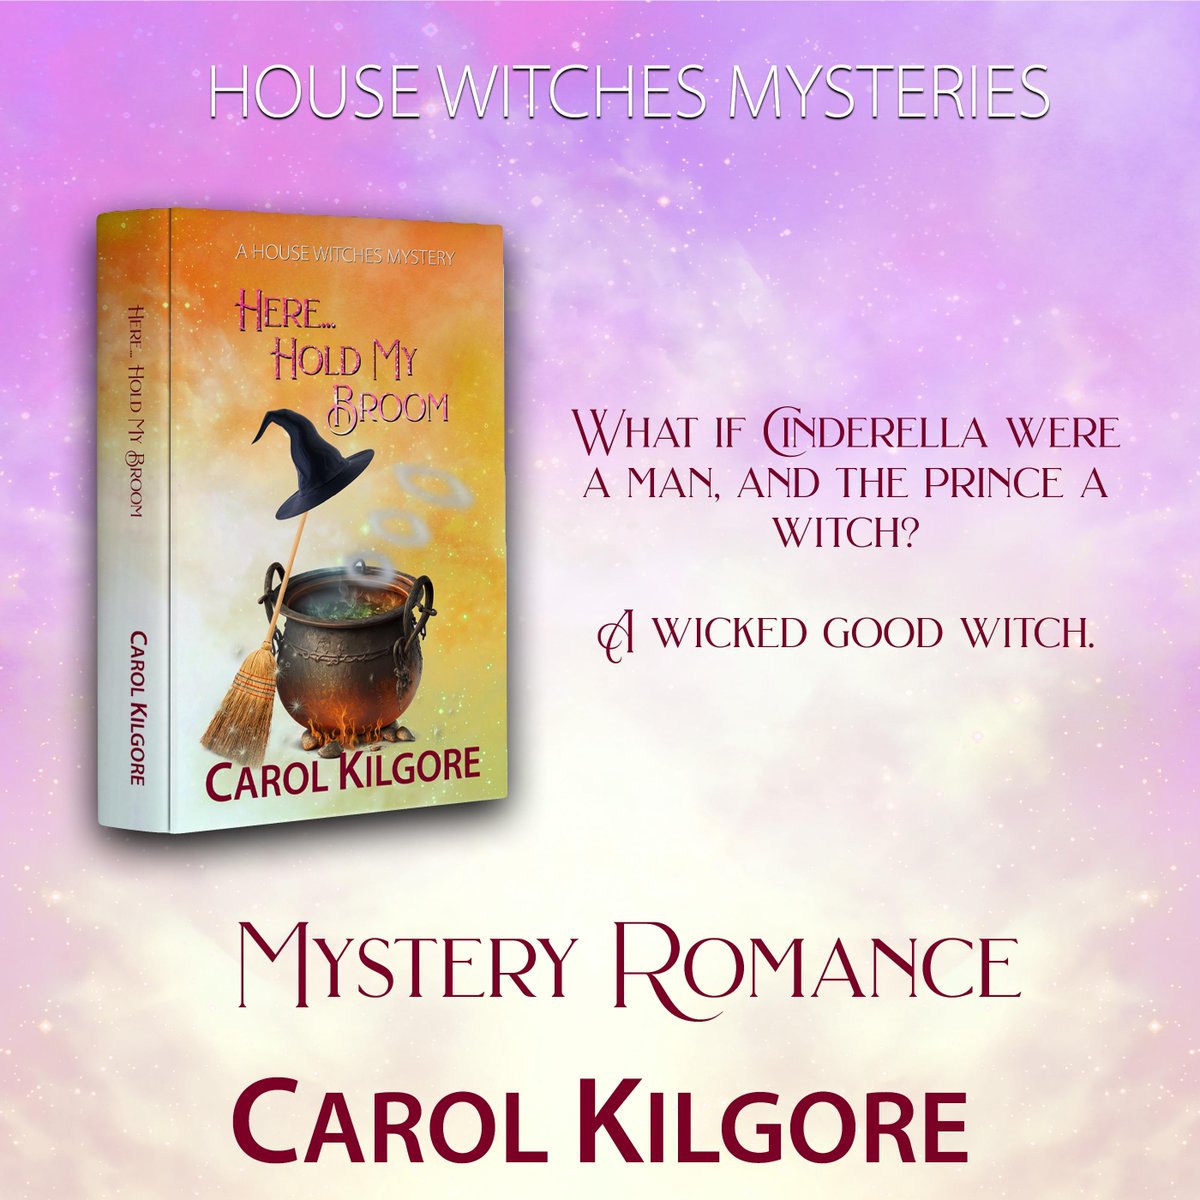 #99cents for a limited time! What if Cinderella were a man, and the prince a witch? A wicked good witch. #mystery #goodwitch 'This series is just so light, an easy read and entertaining!!! You really should try this series/author!!!' amazon.com/Here-Broom-Hou…